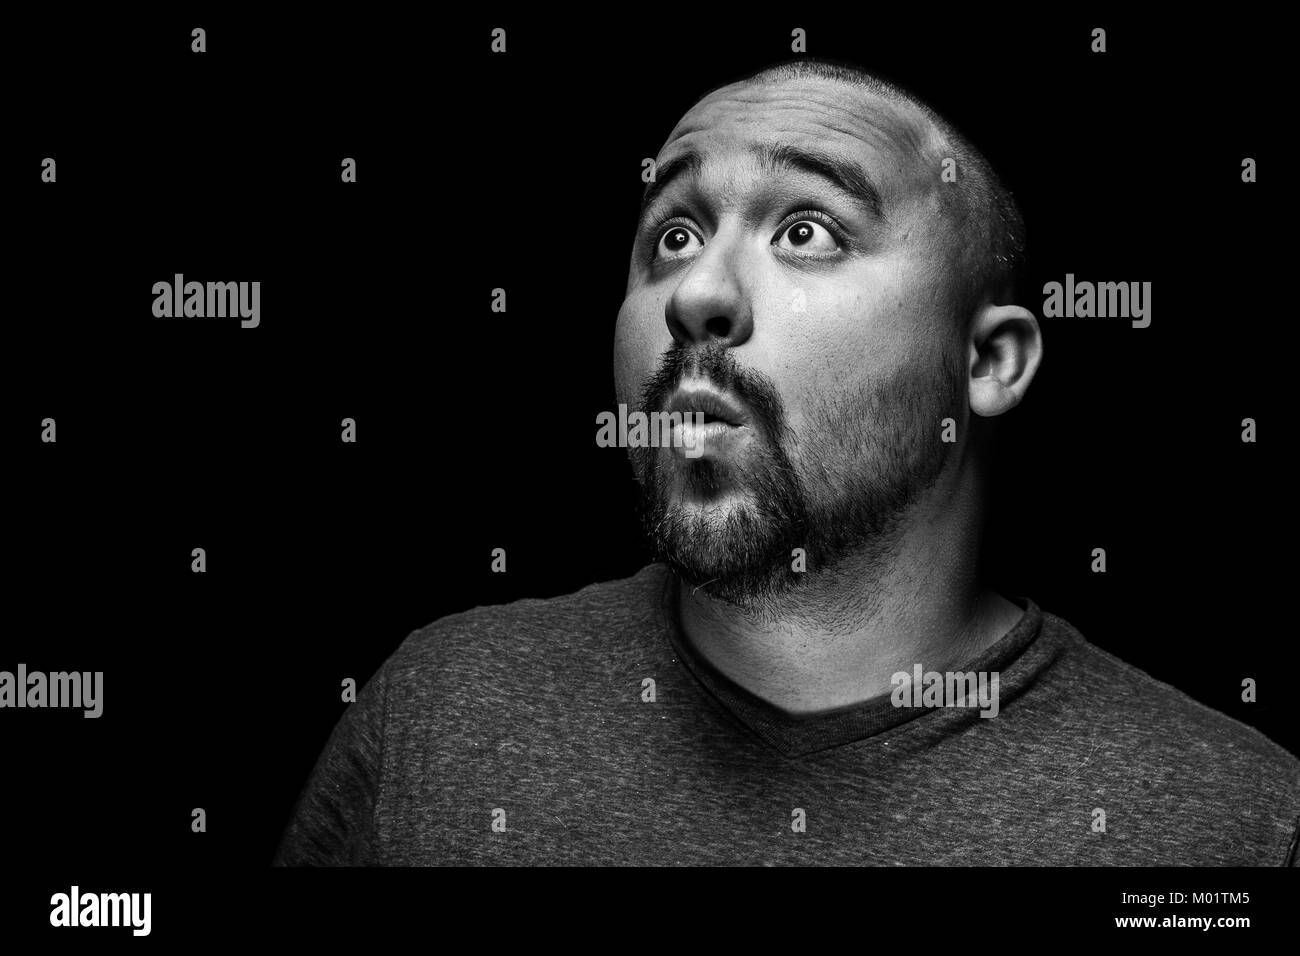 A high contrast black and white emotional and surprised portrait of a hispanic man. Stock Photo